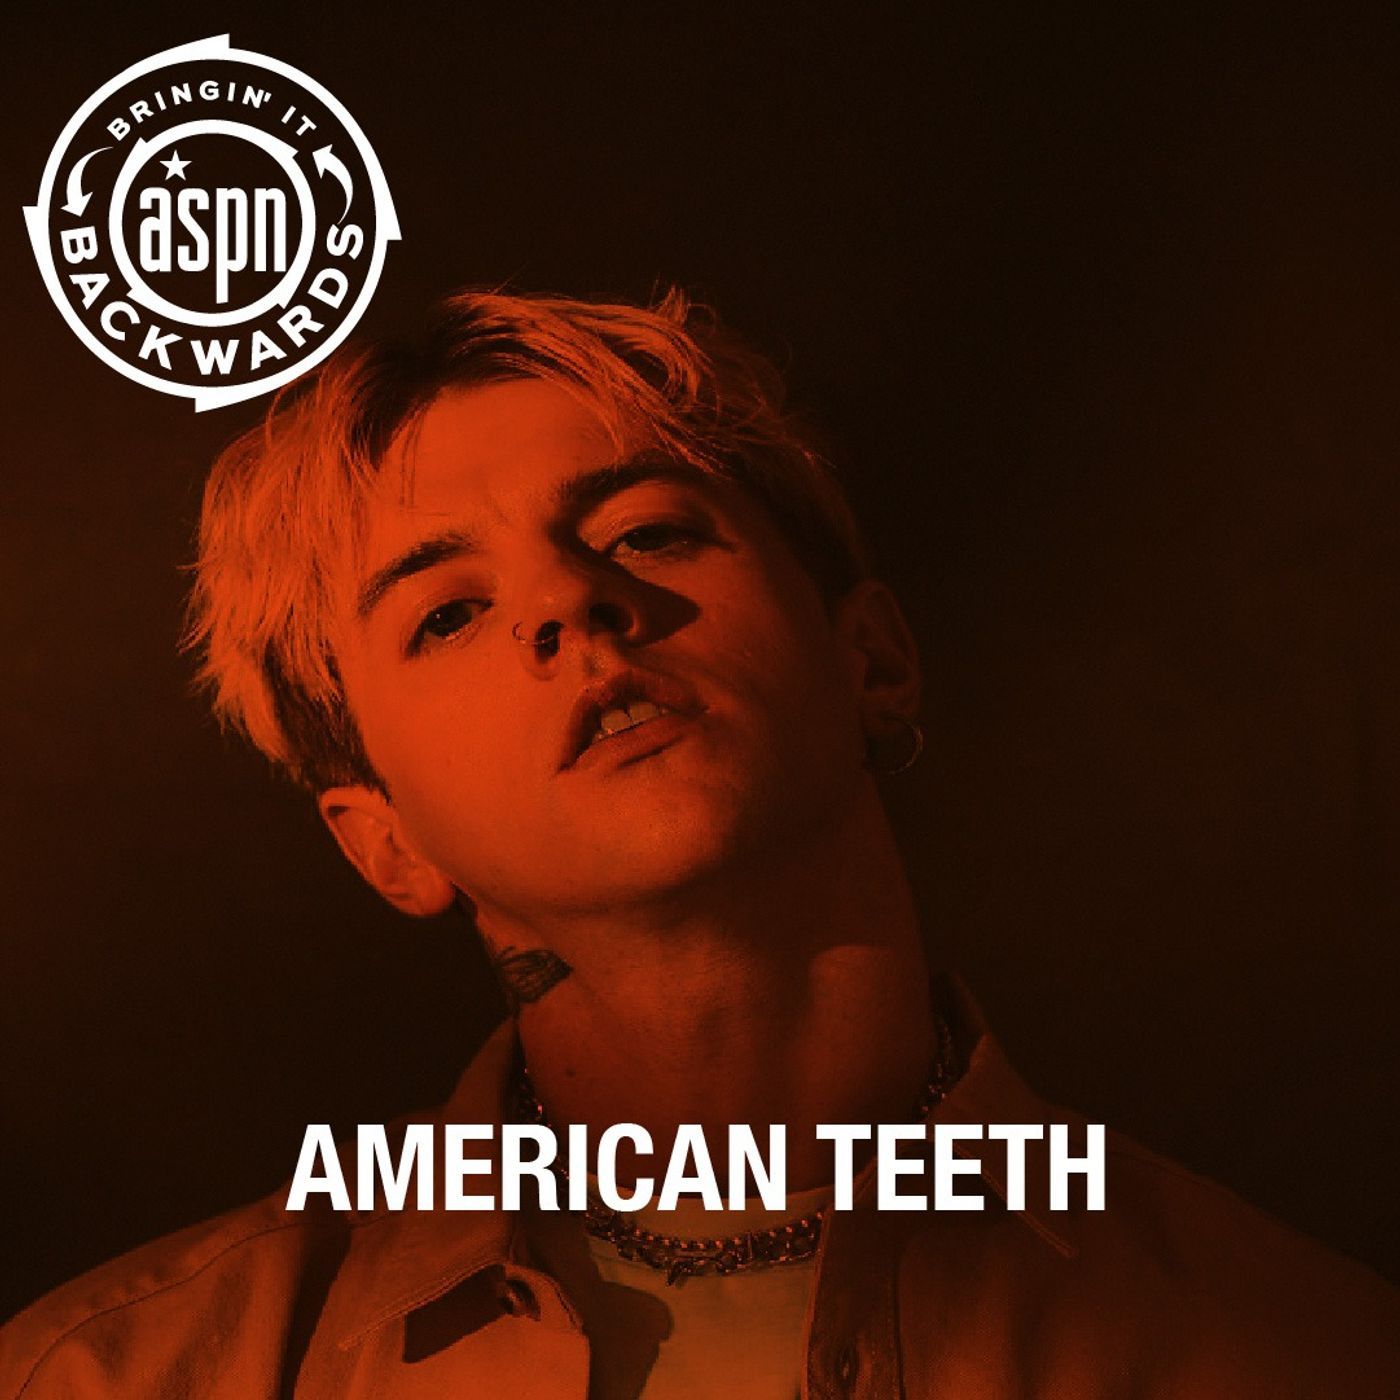 Interview with American Teeth Image